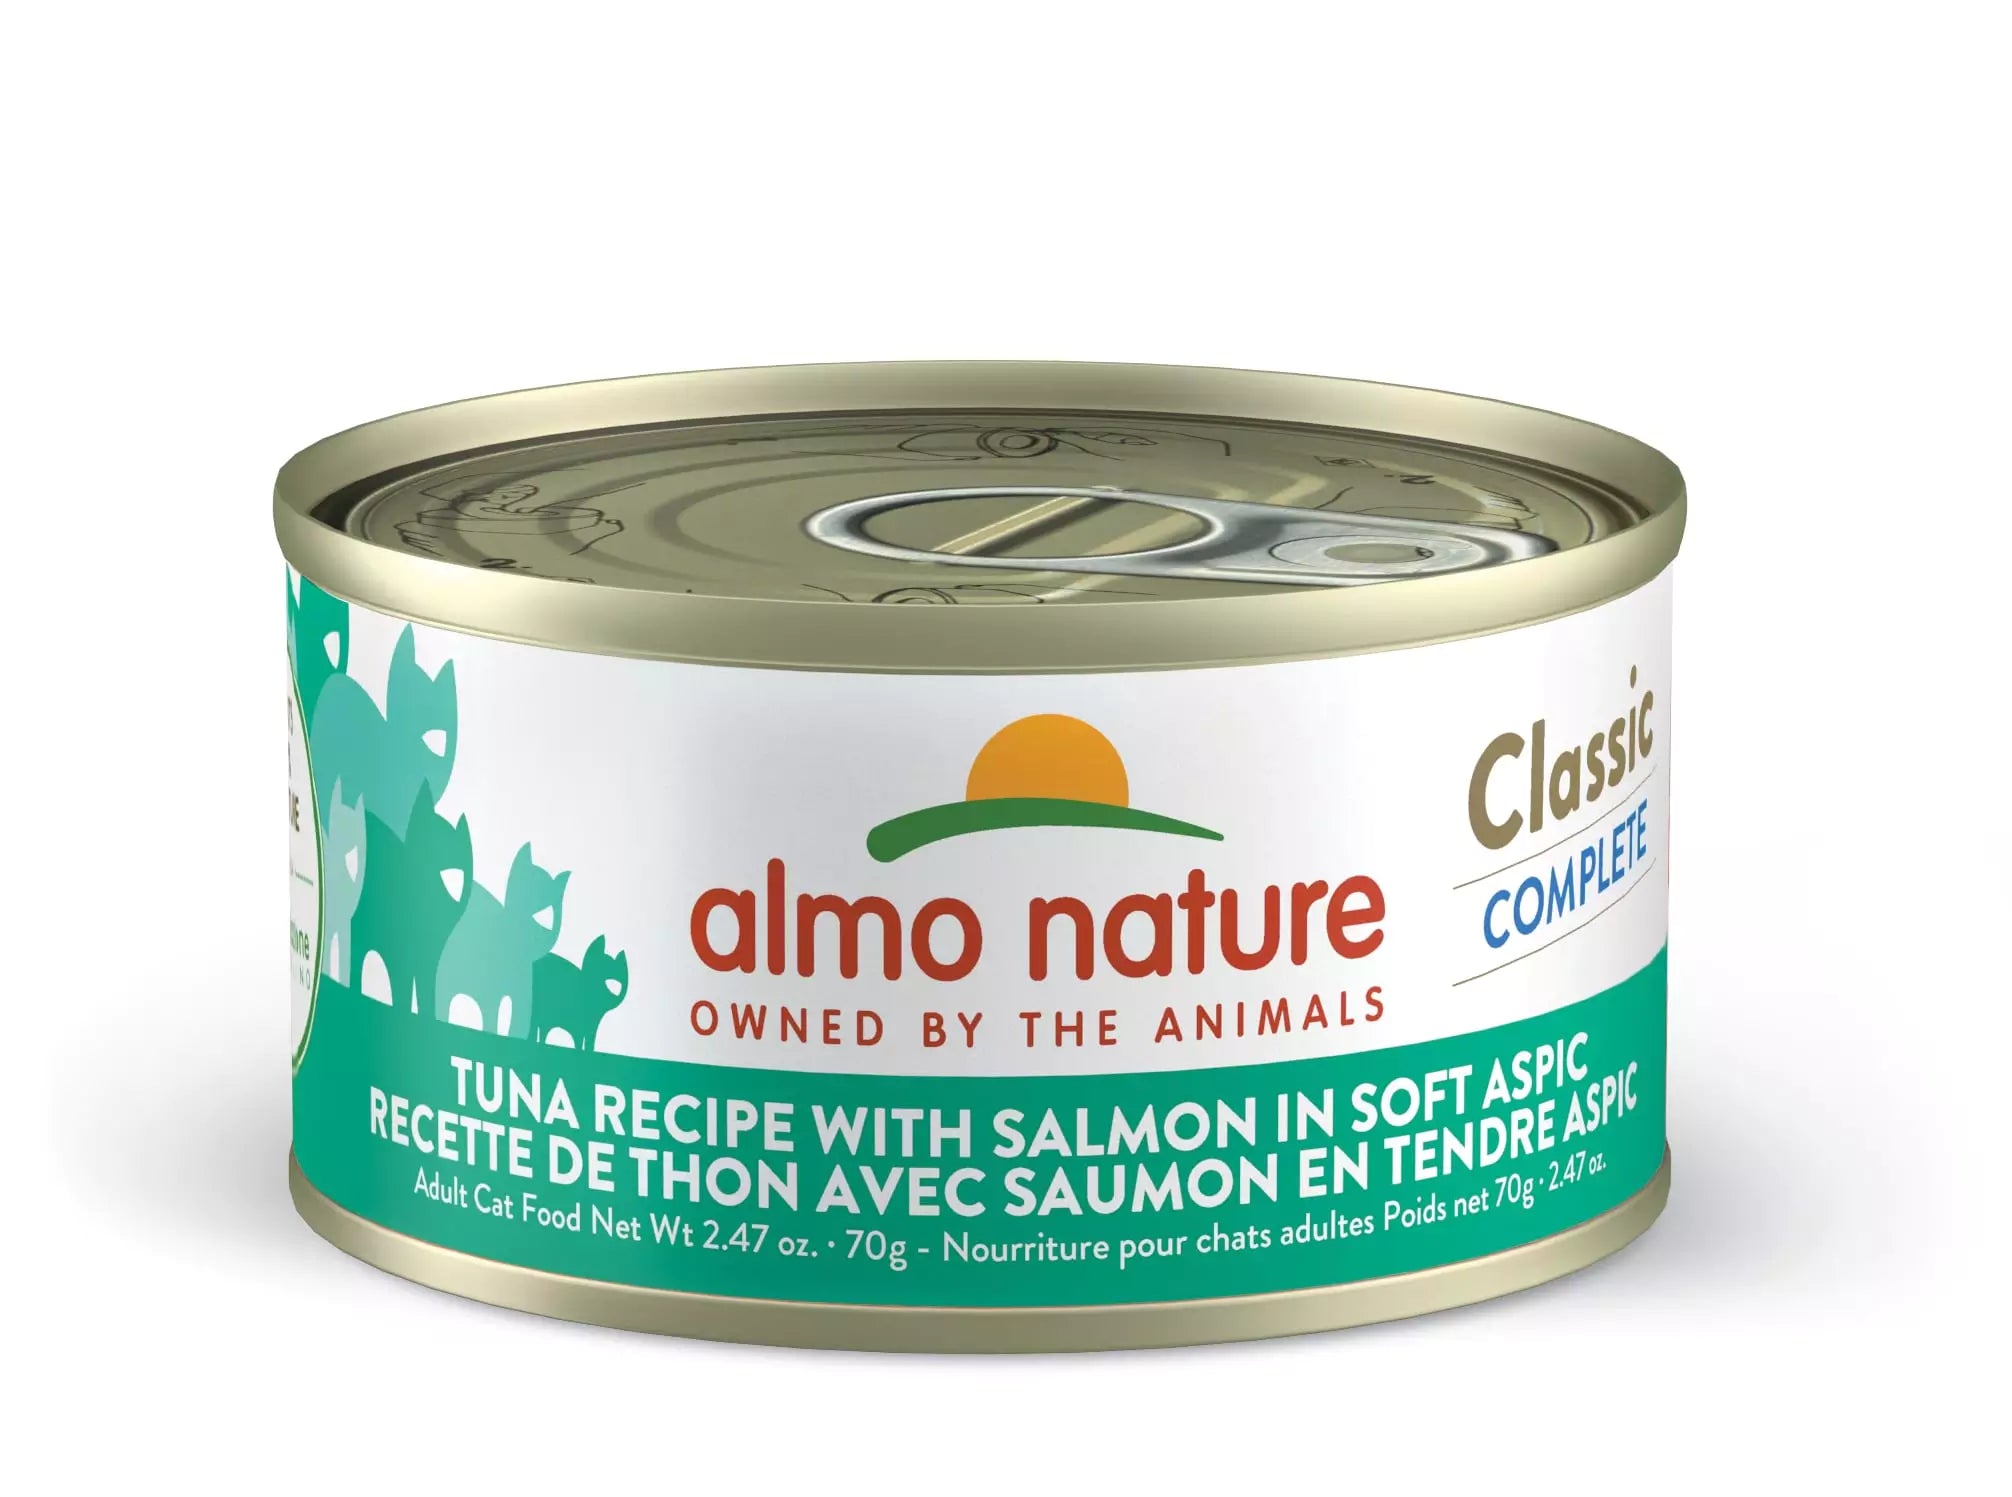 Almo Nature - Classic Complete Tuna With Salmon In Soft Aspic (Wet Cat Food)